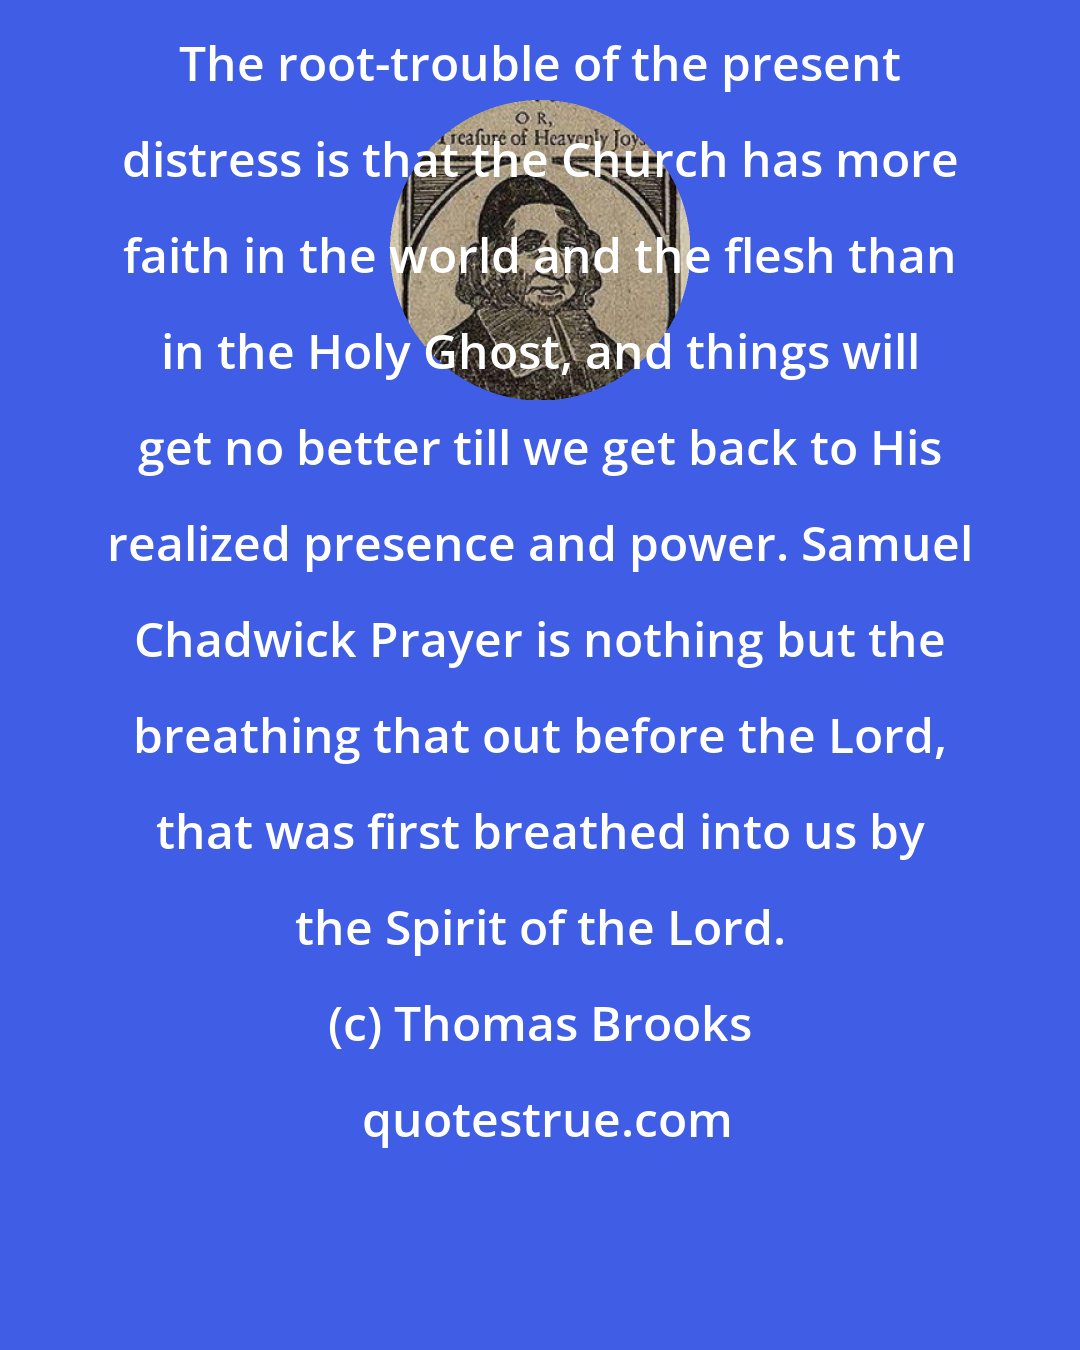 Thomas Brooks: The root-trouble of the present distress is that the Church has more faith in the world and the flesh than in the Holy Ghost, and things will get no better till we get back to His realized presence and power. Samuel Chadwick Prayer is nothing but the breathing that out before the Lord, that was first breathed into us by the Spirit of the Lord.